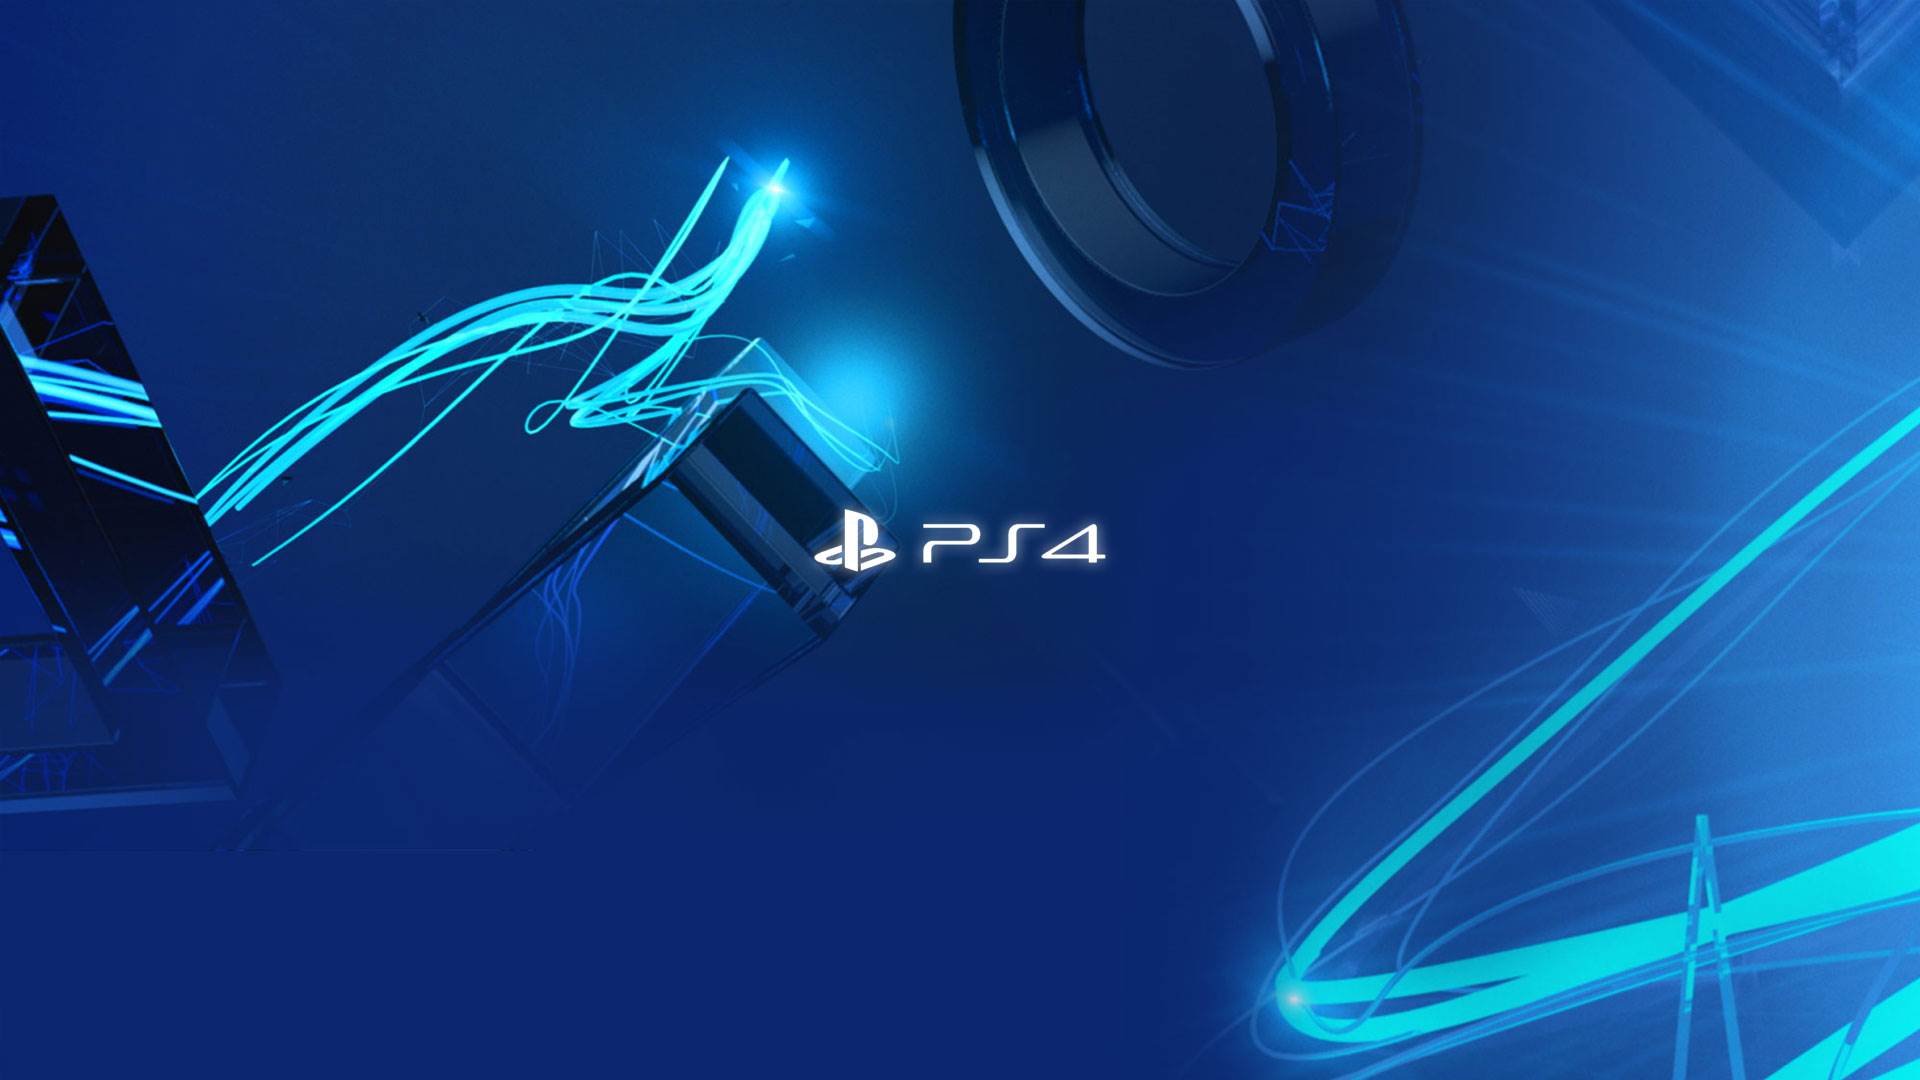 Ps4 Wallpaper In 1080p HD Gamingbolt Video Game News Res